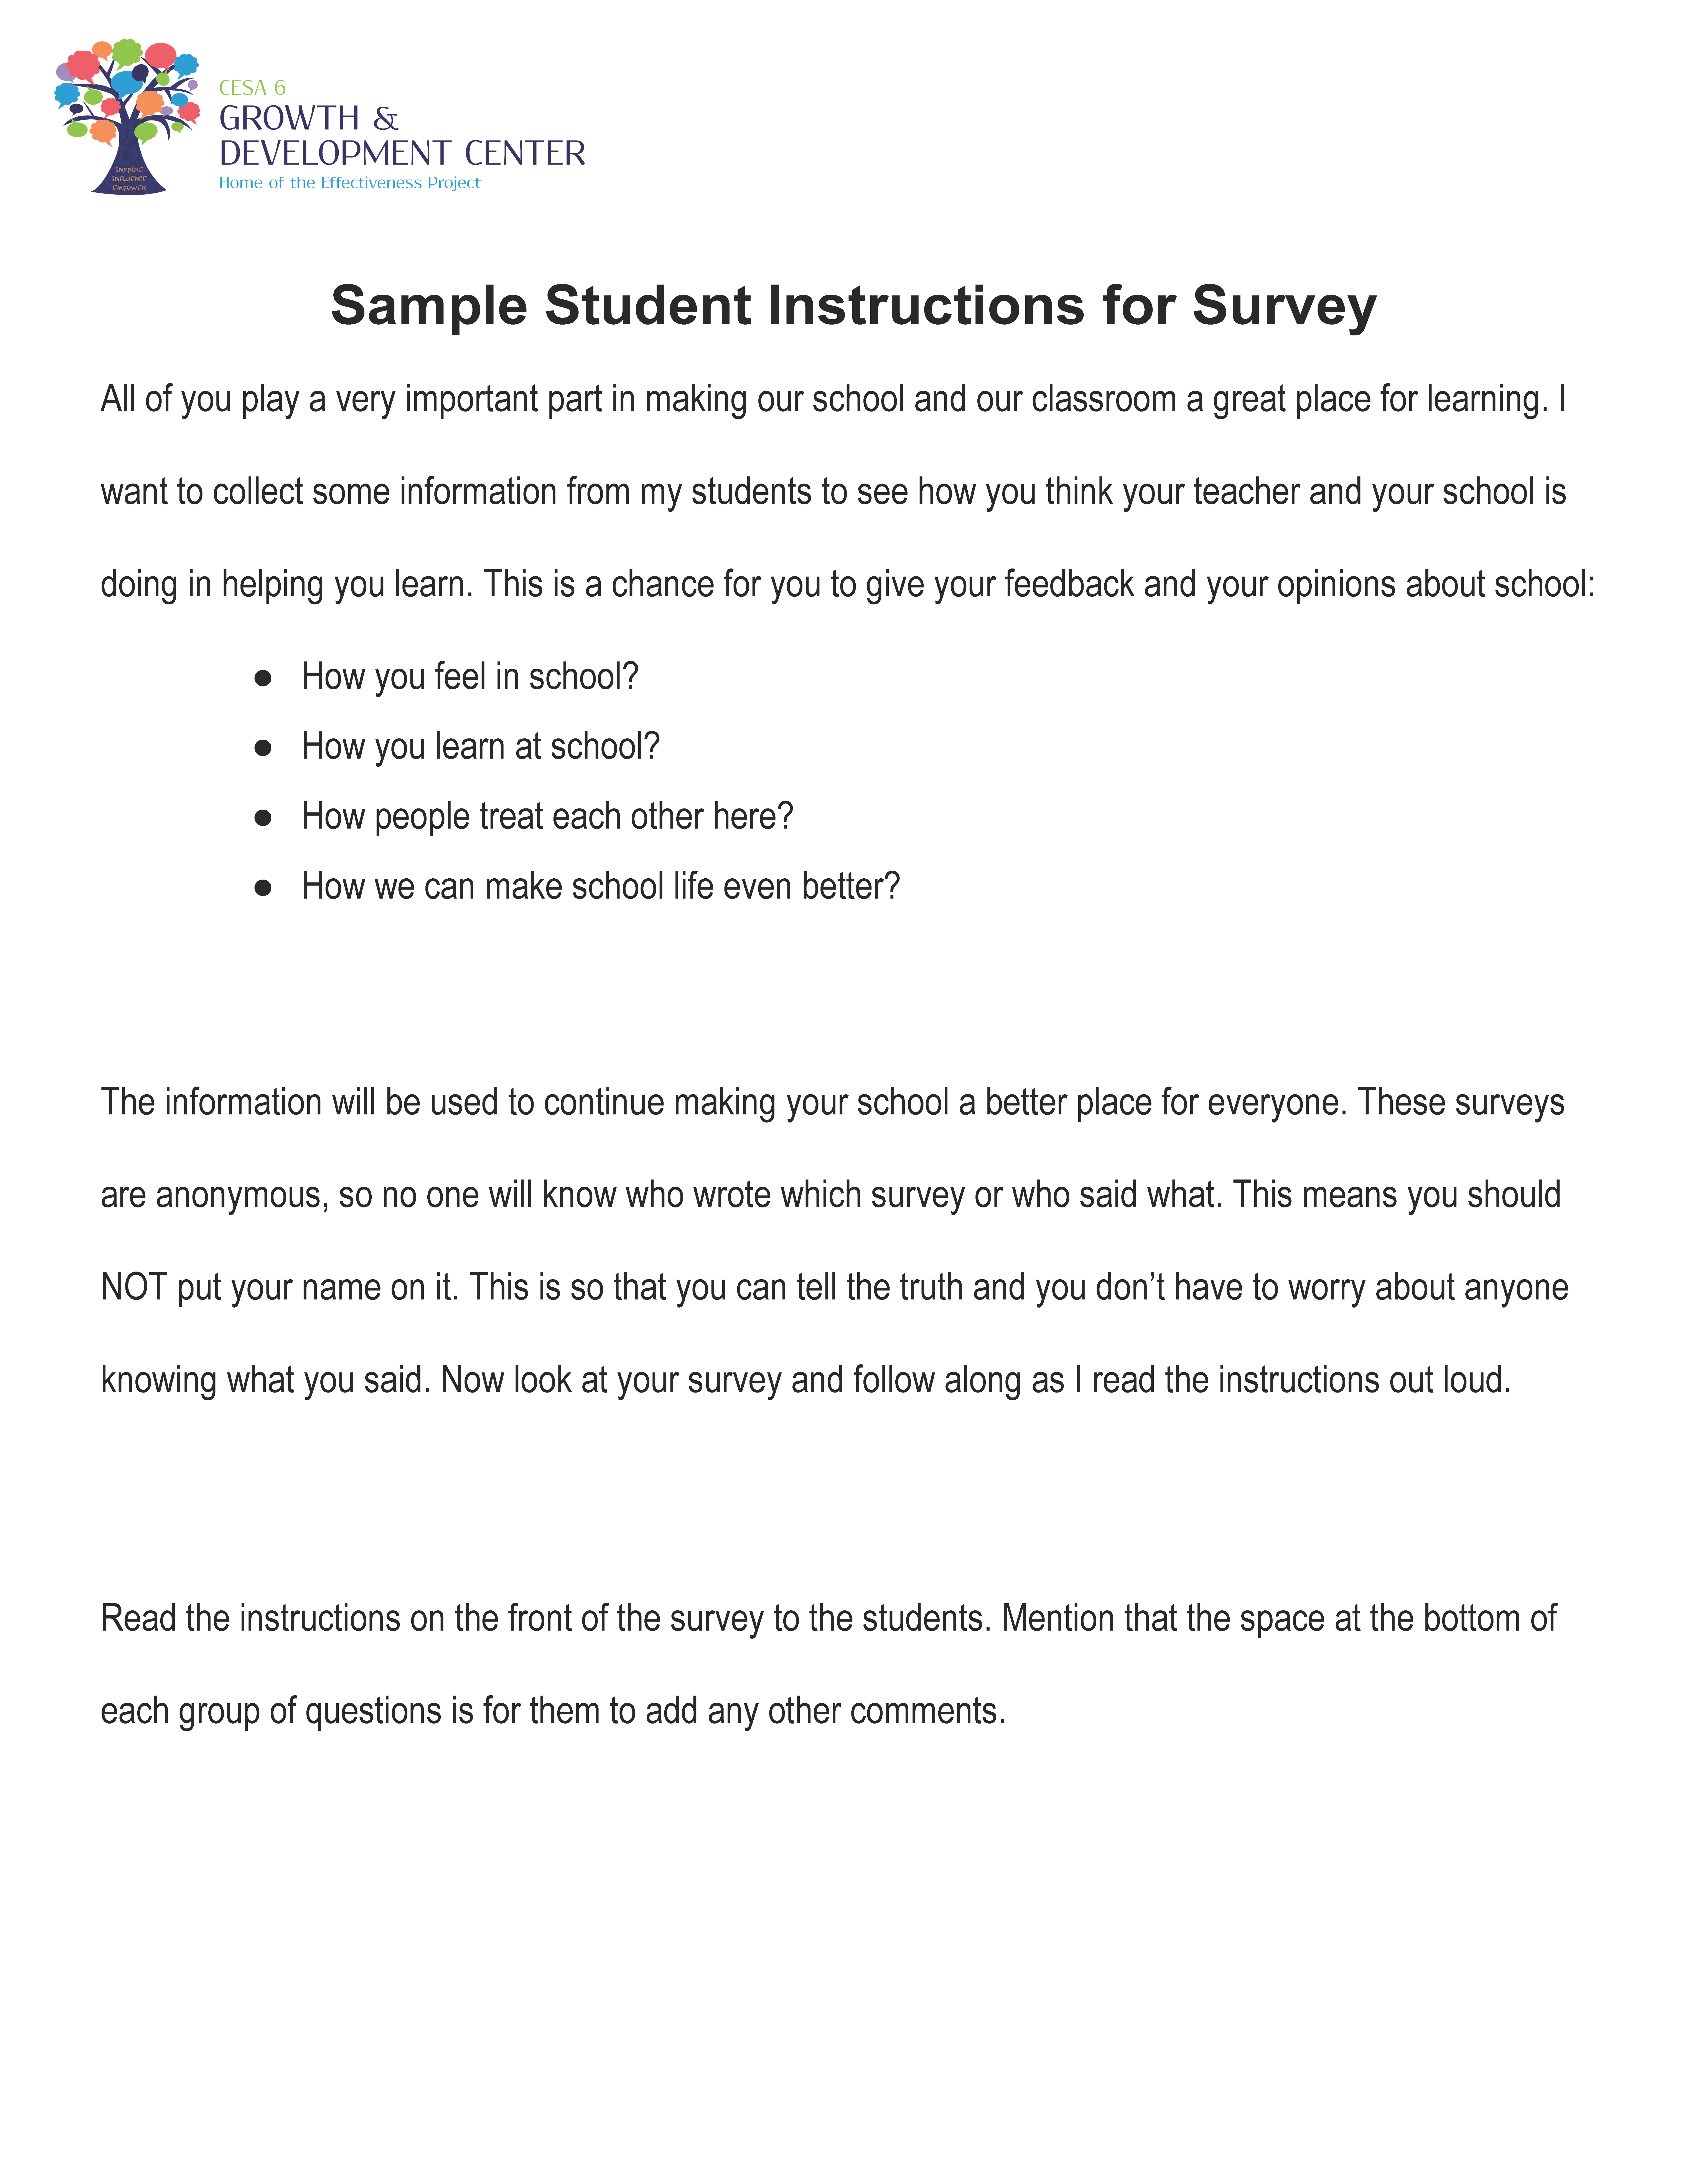 Sample_Student_Instructions_for_Survey.png